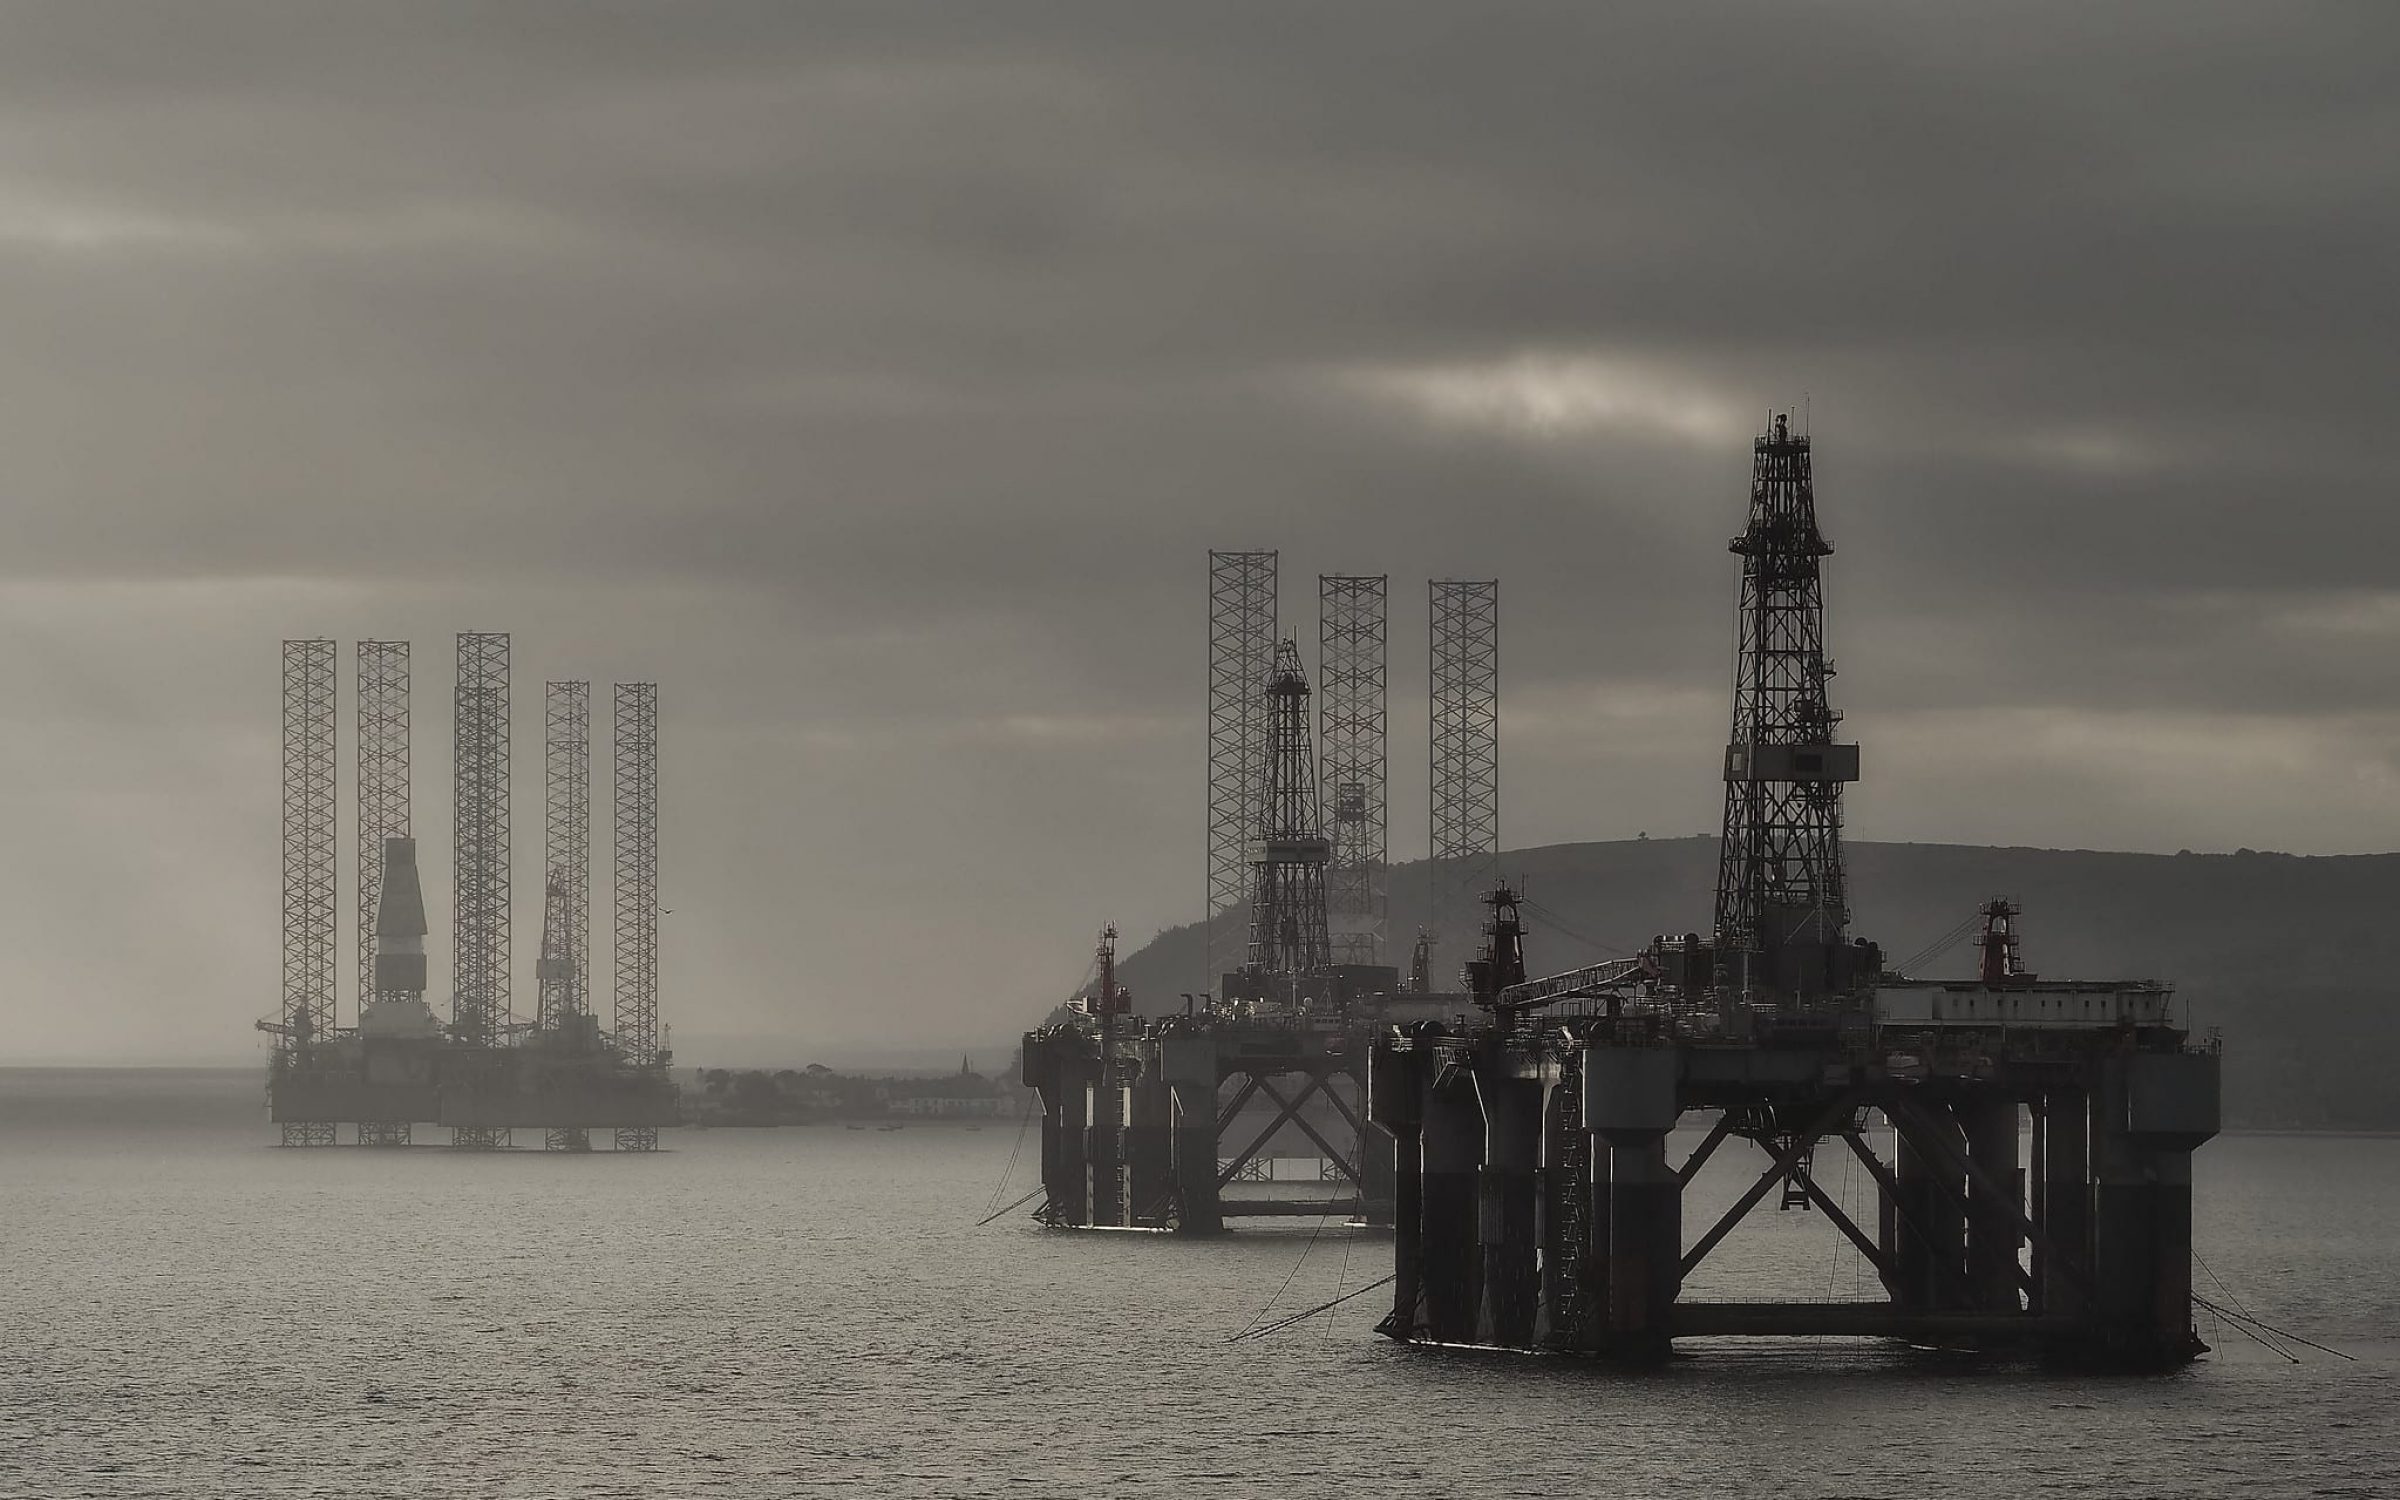 Cromarty Firth oil rigs. Flickr/joiseyshowaa